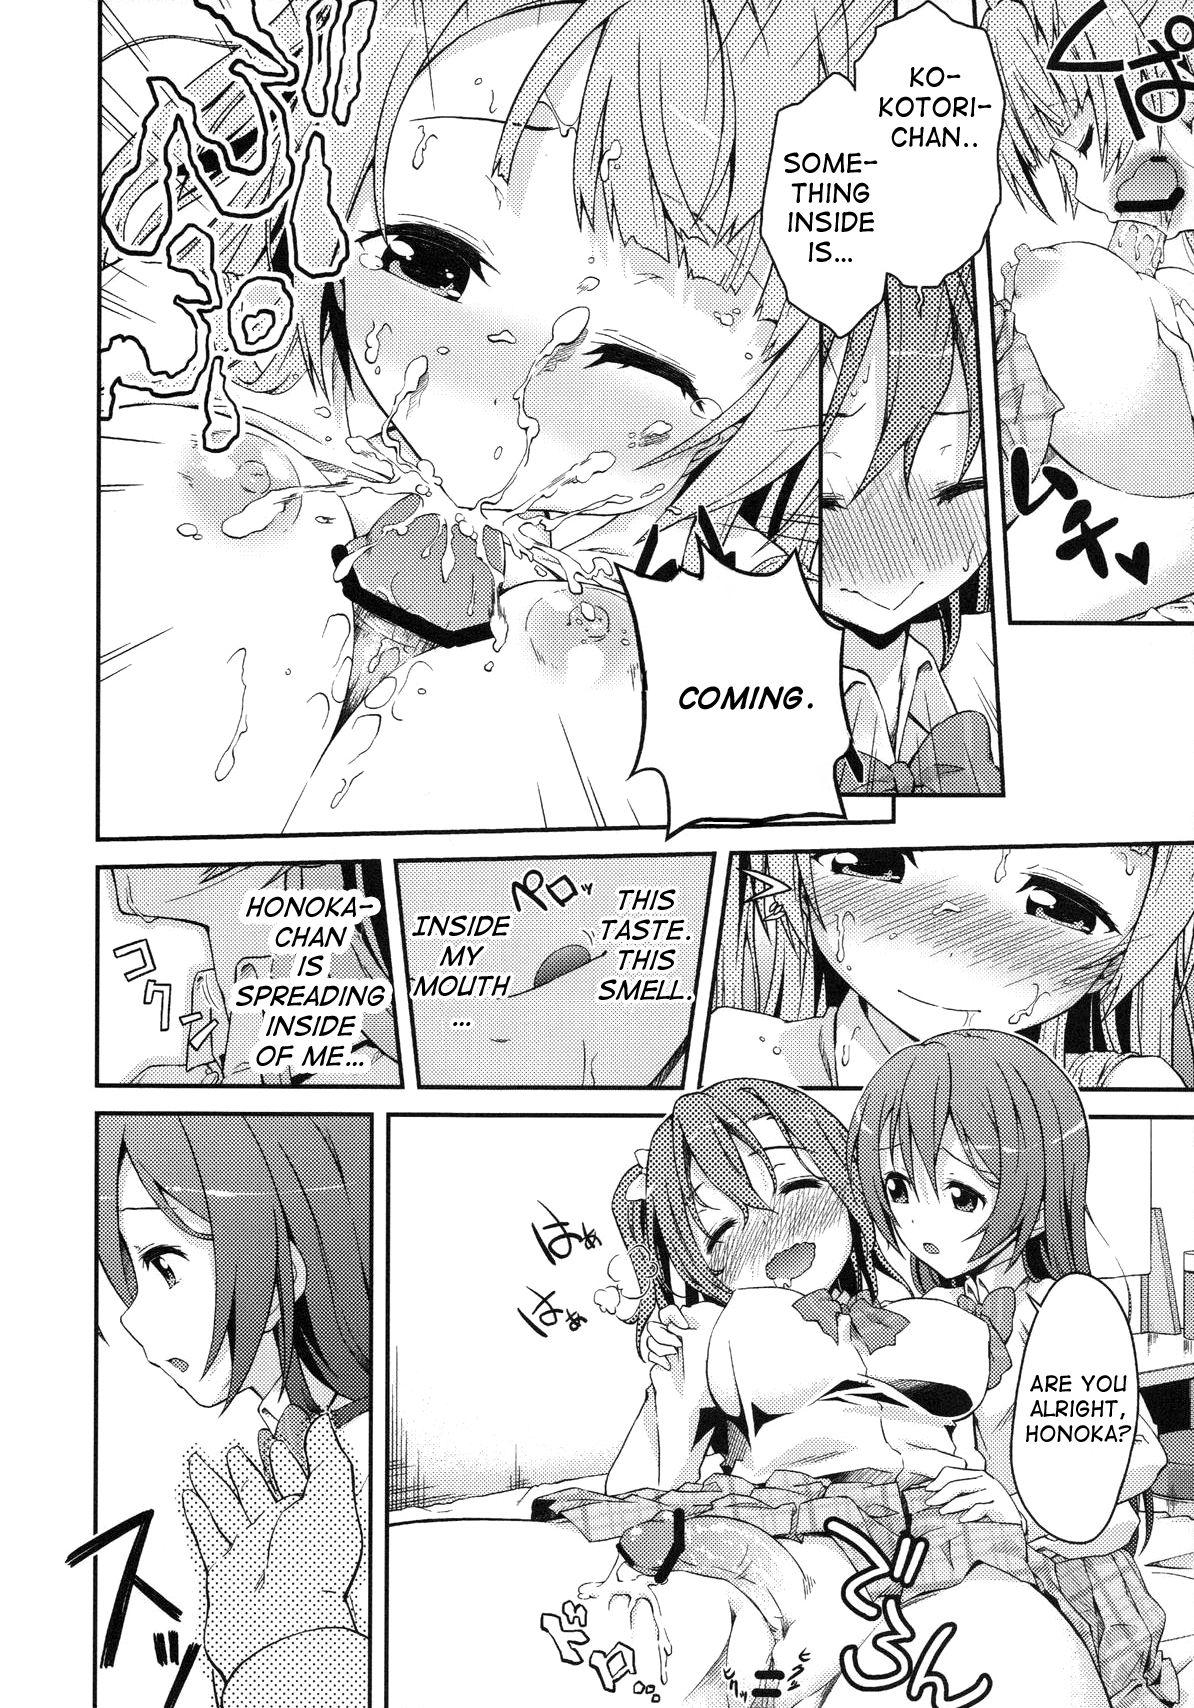 Gostosa Love Linve! - Love live Play - Page 9